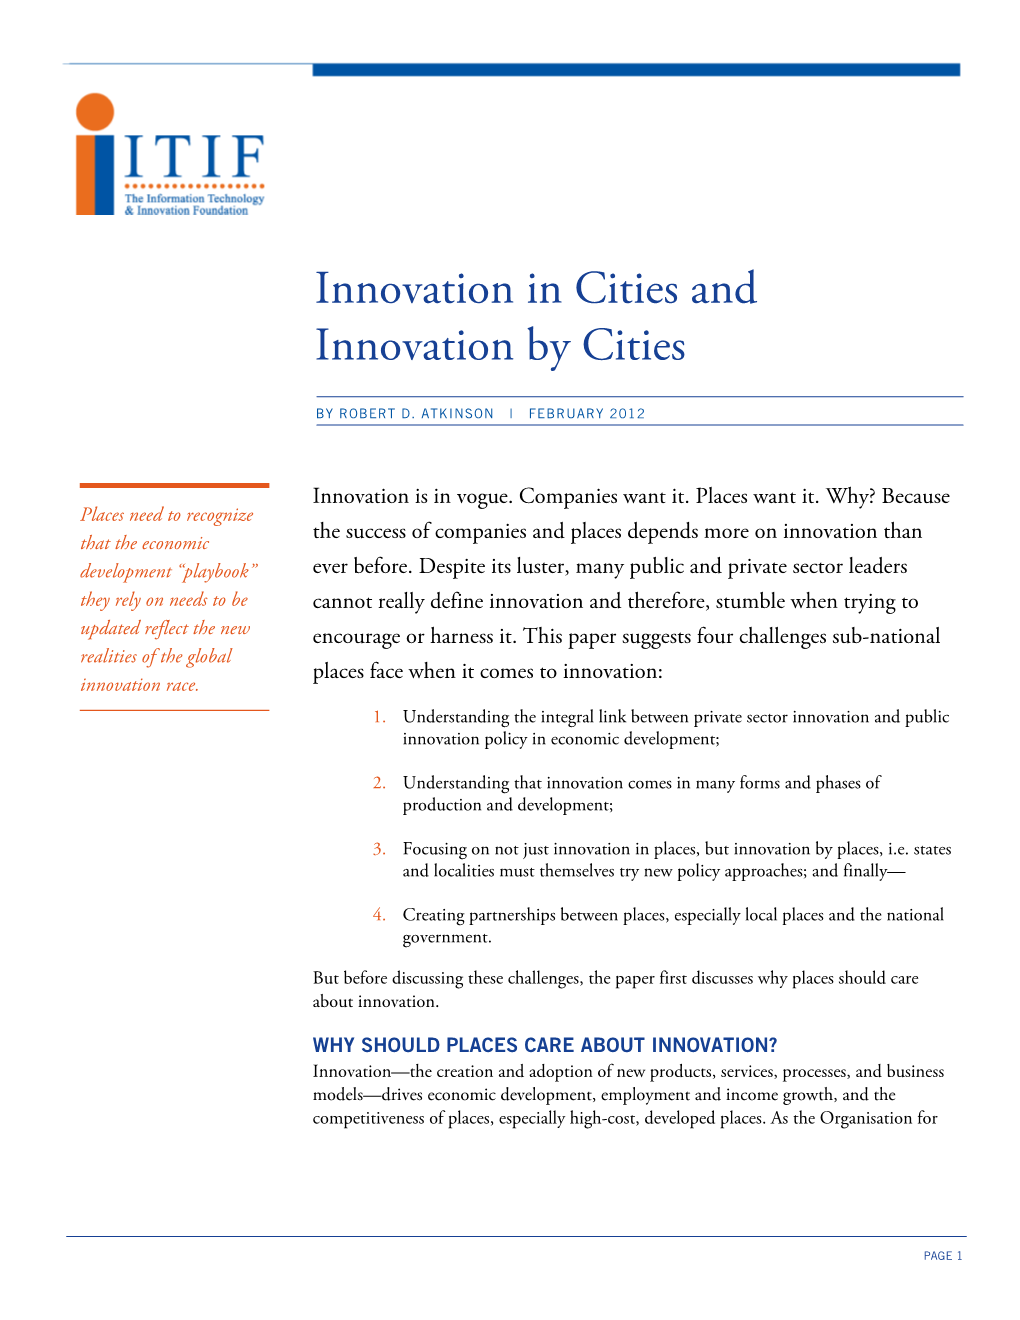 Innovation in Cities and Innovation by Cities